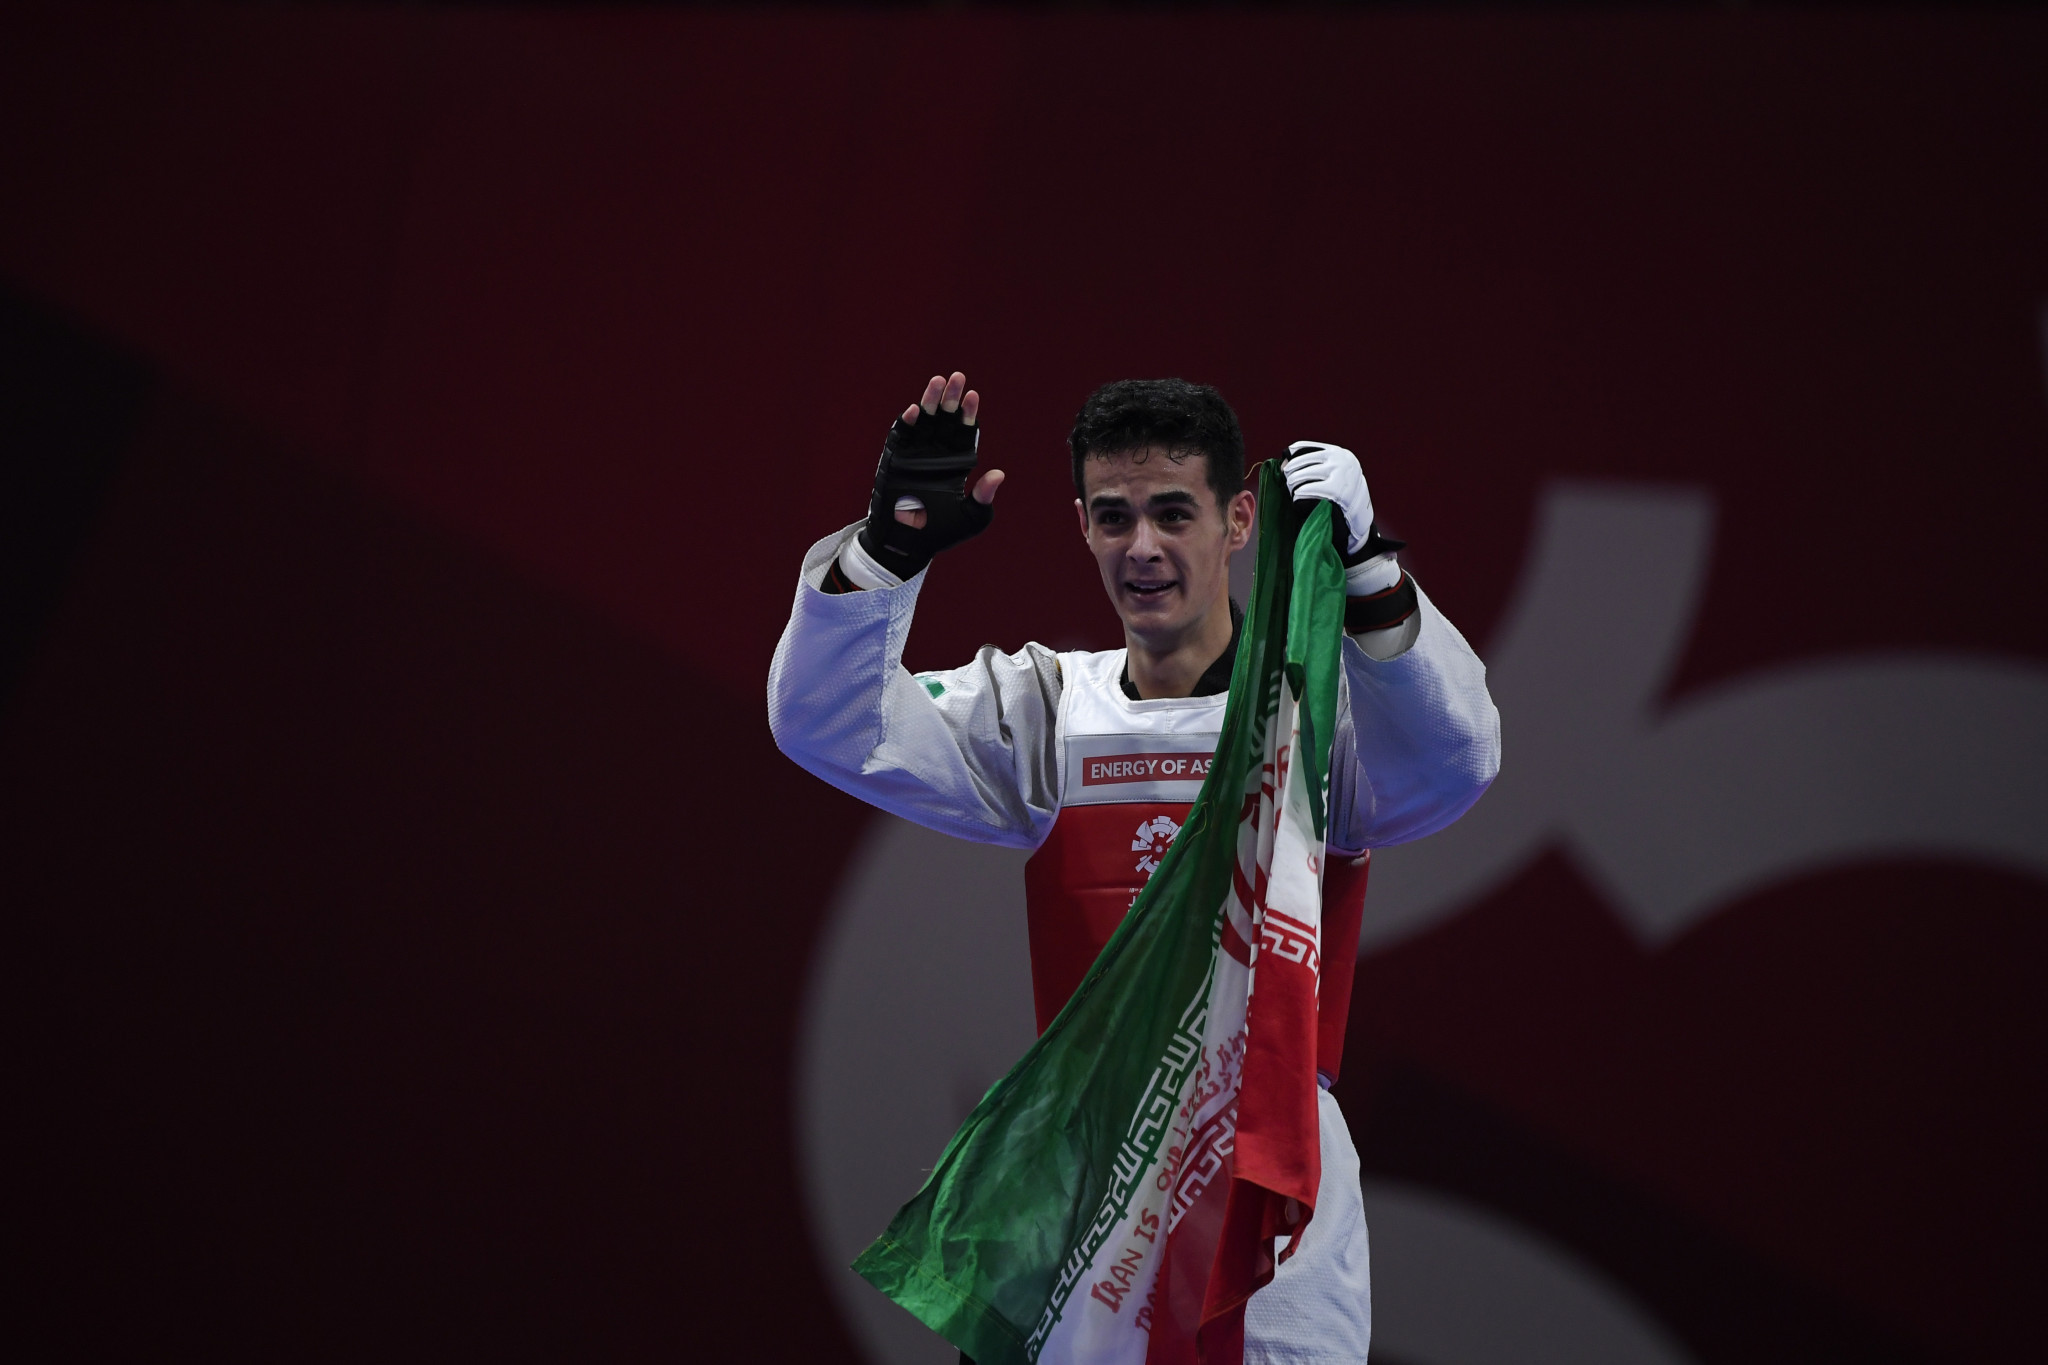 Mirhashem Hosseini is one of two Iranian taekwondo players to have already qualified for the Olympics ©Getty Images